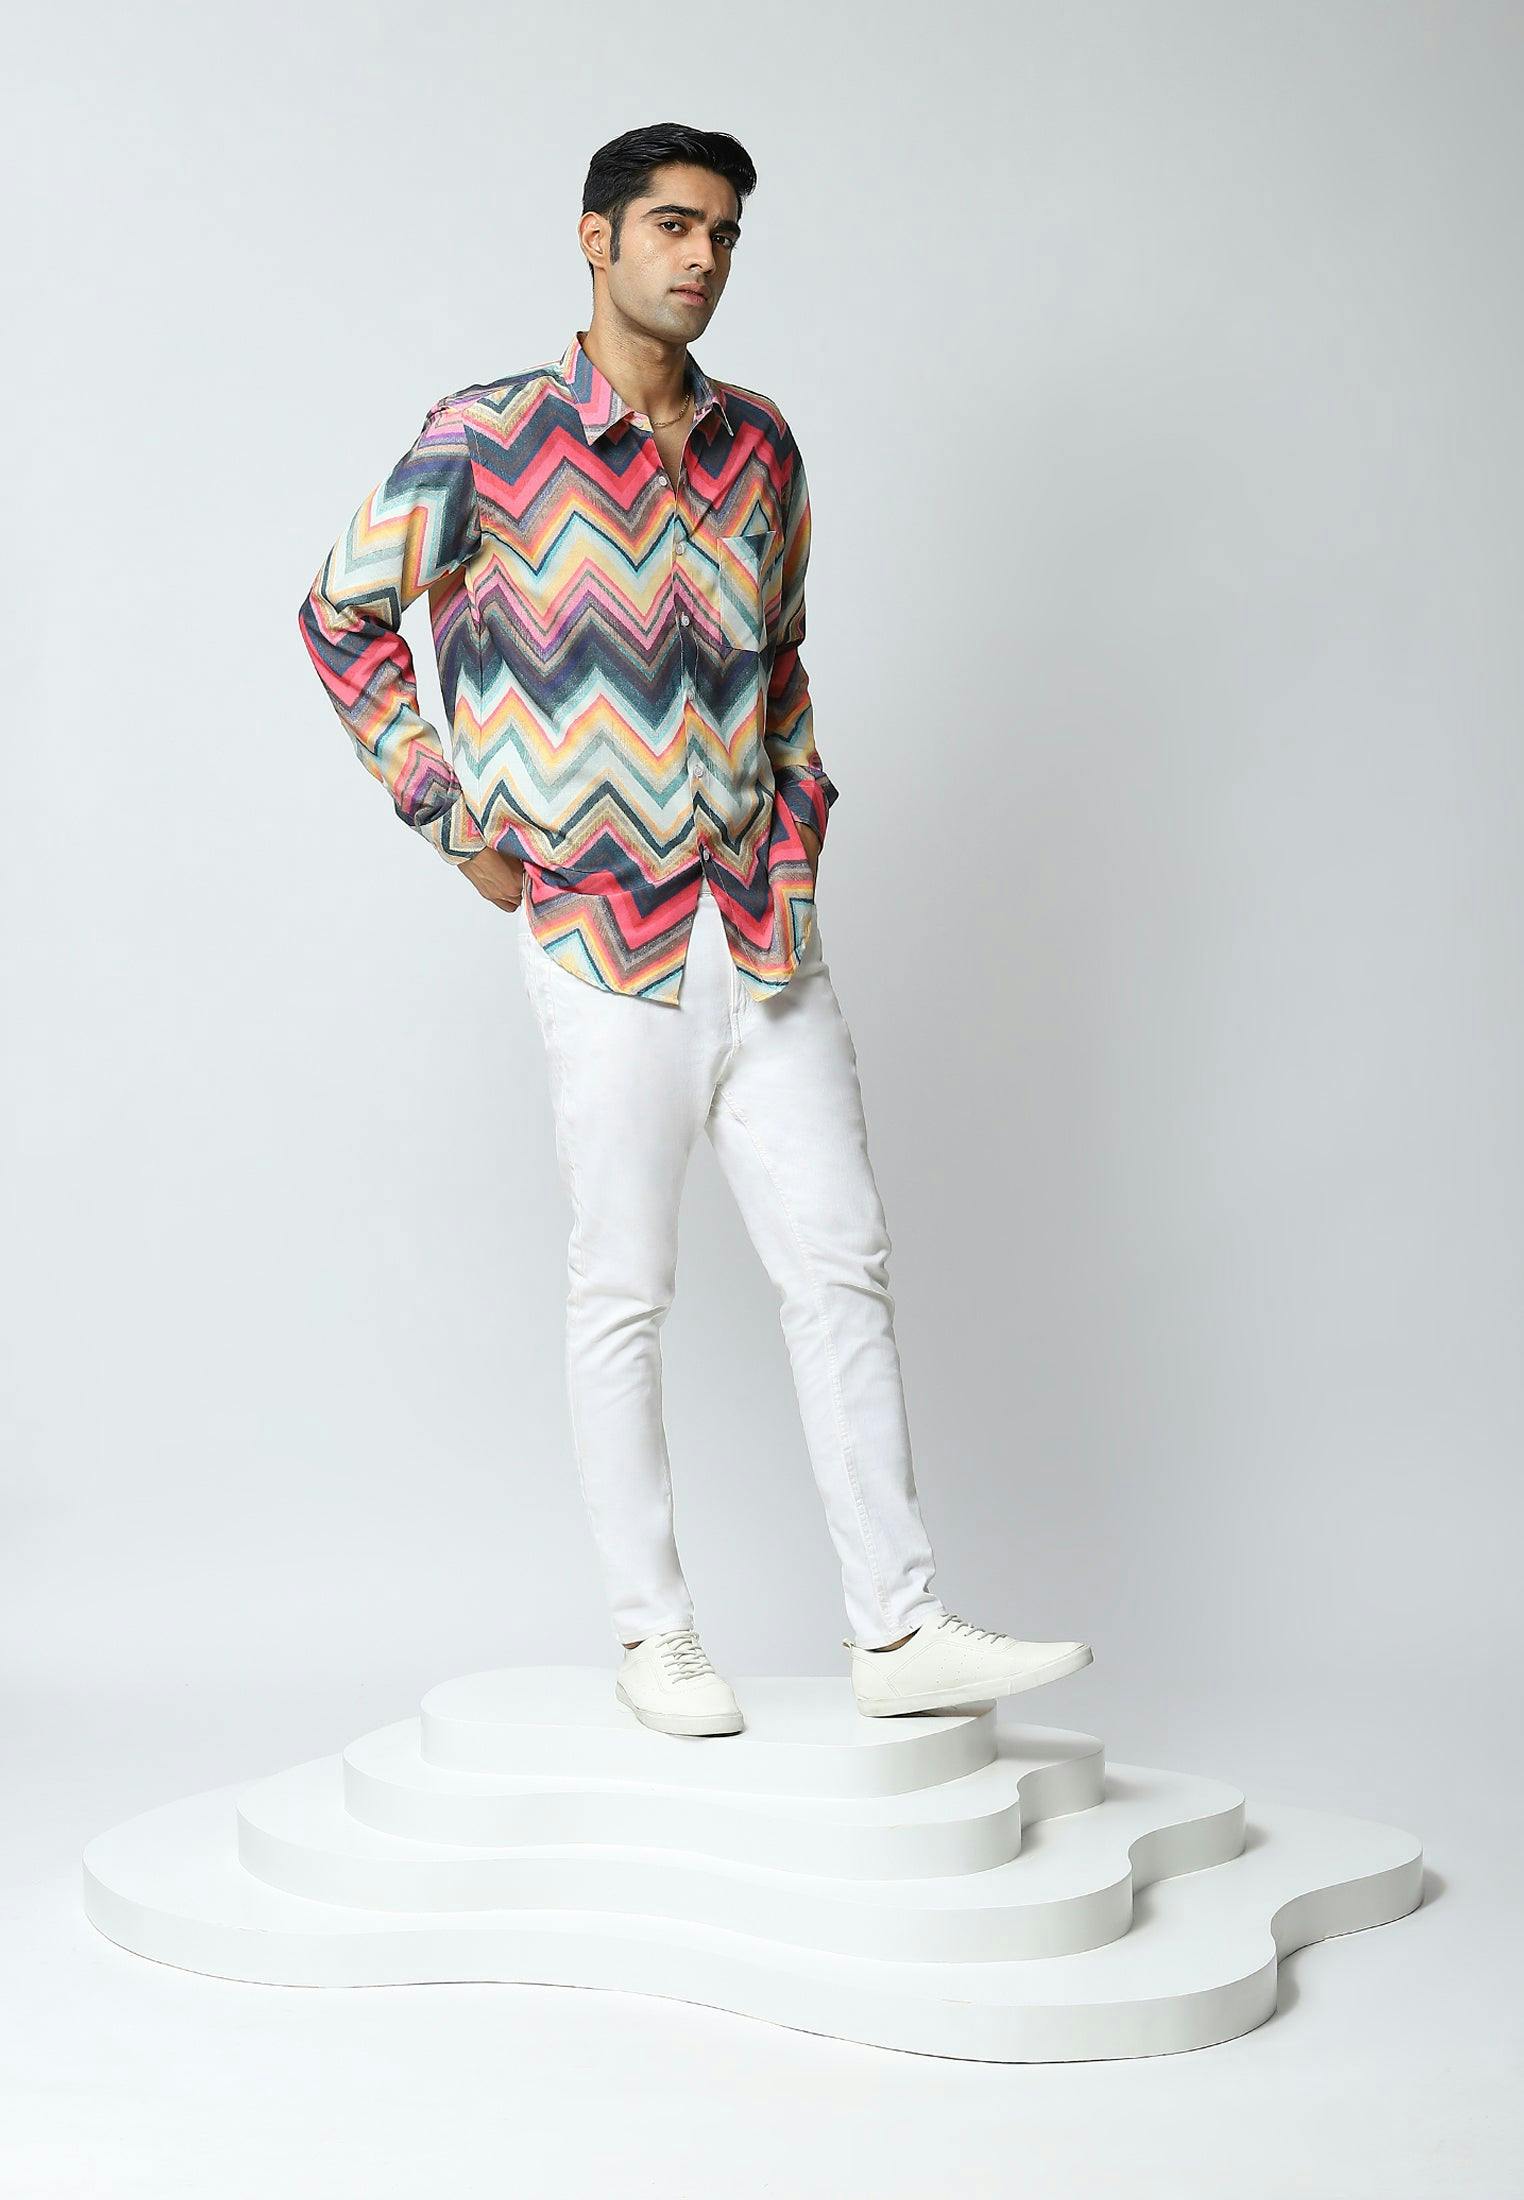 Additional image of 'Omani Mirage' Mens Shirt, a product by Lola's